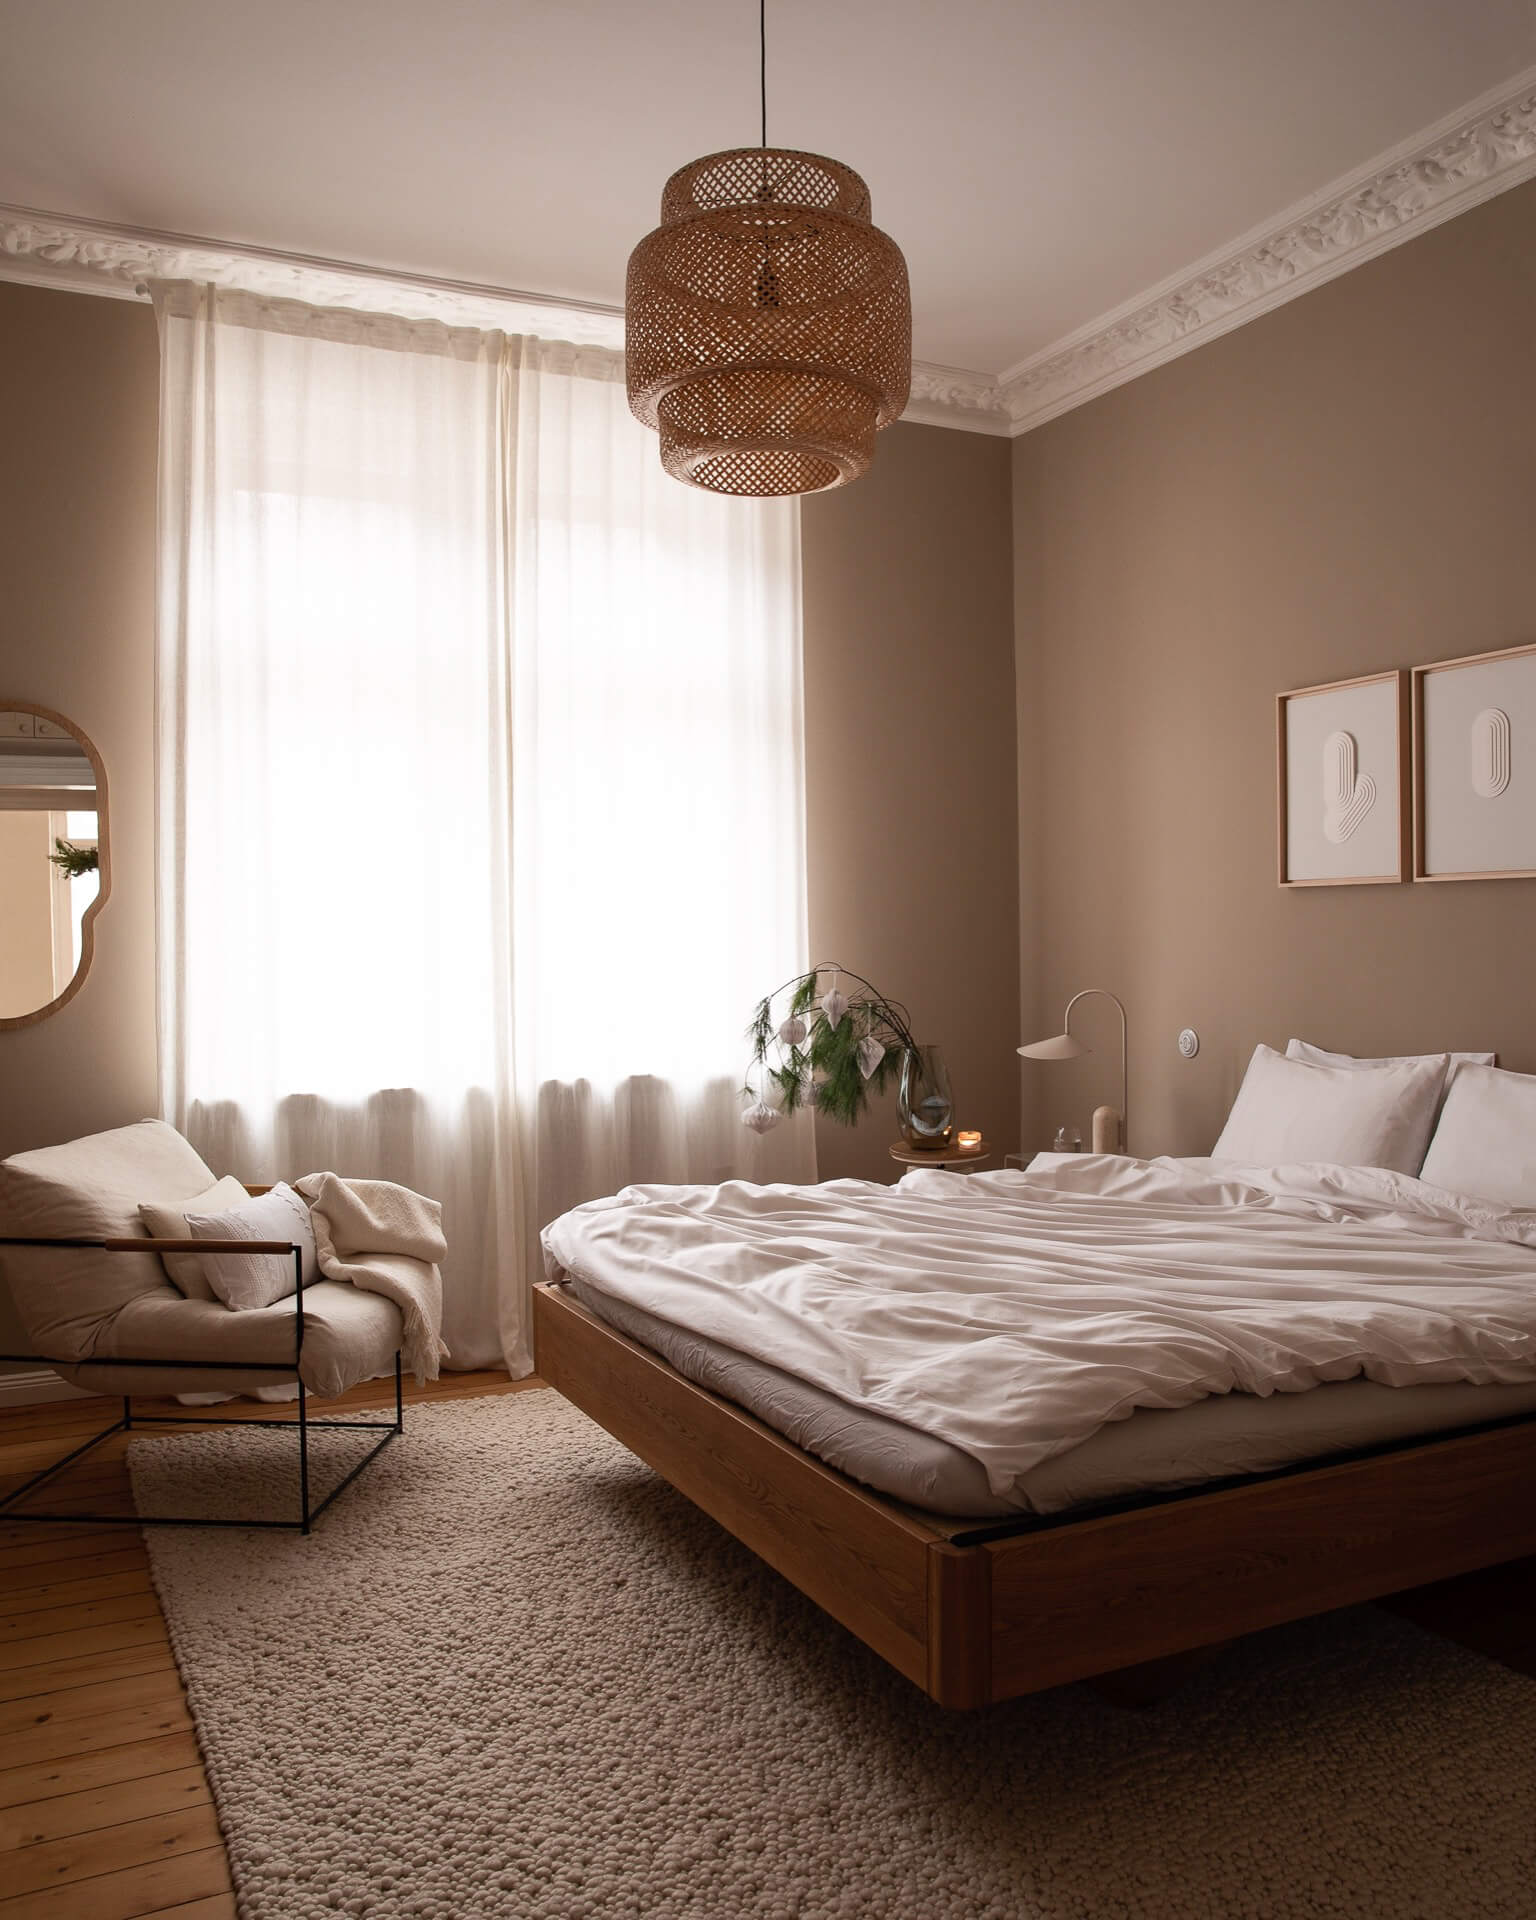 Neutral bedroom decor by Instagrammers Danilo and Paolo of @homeinheidelberg home tour